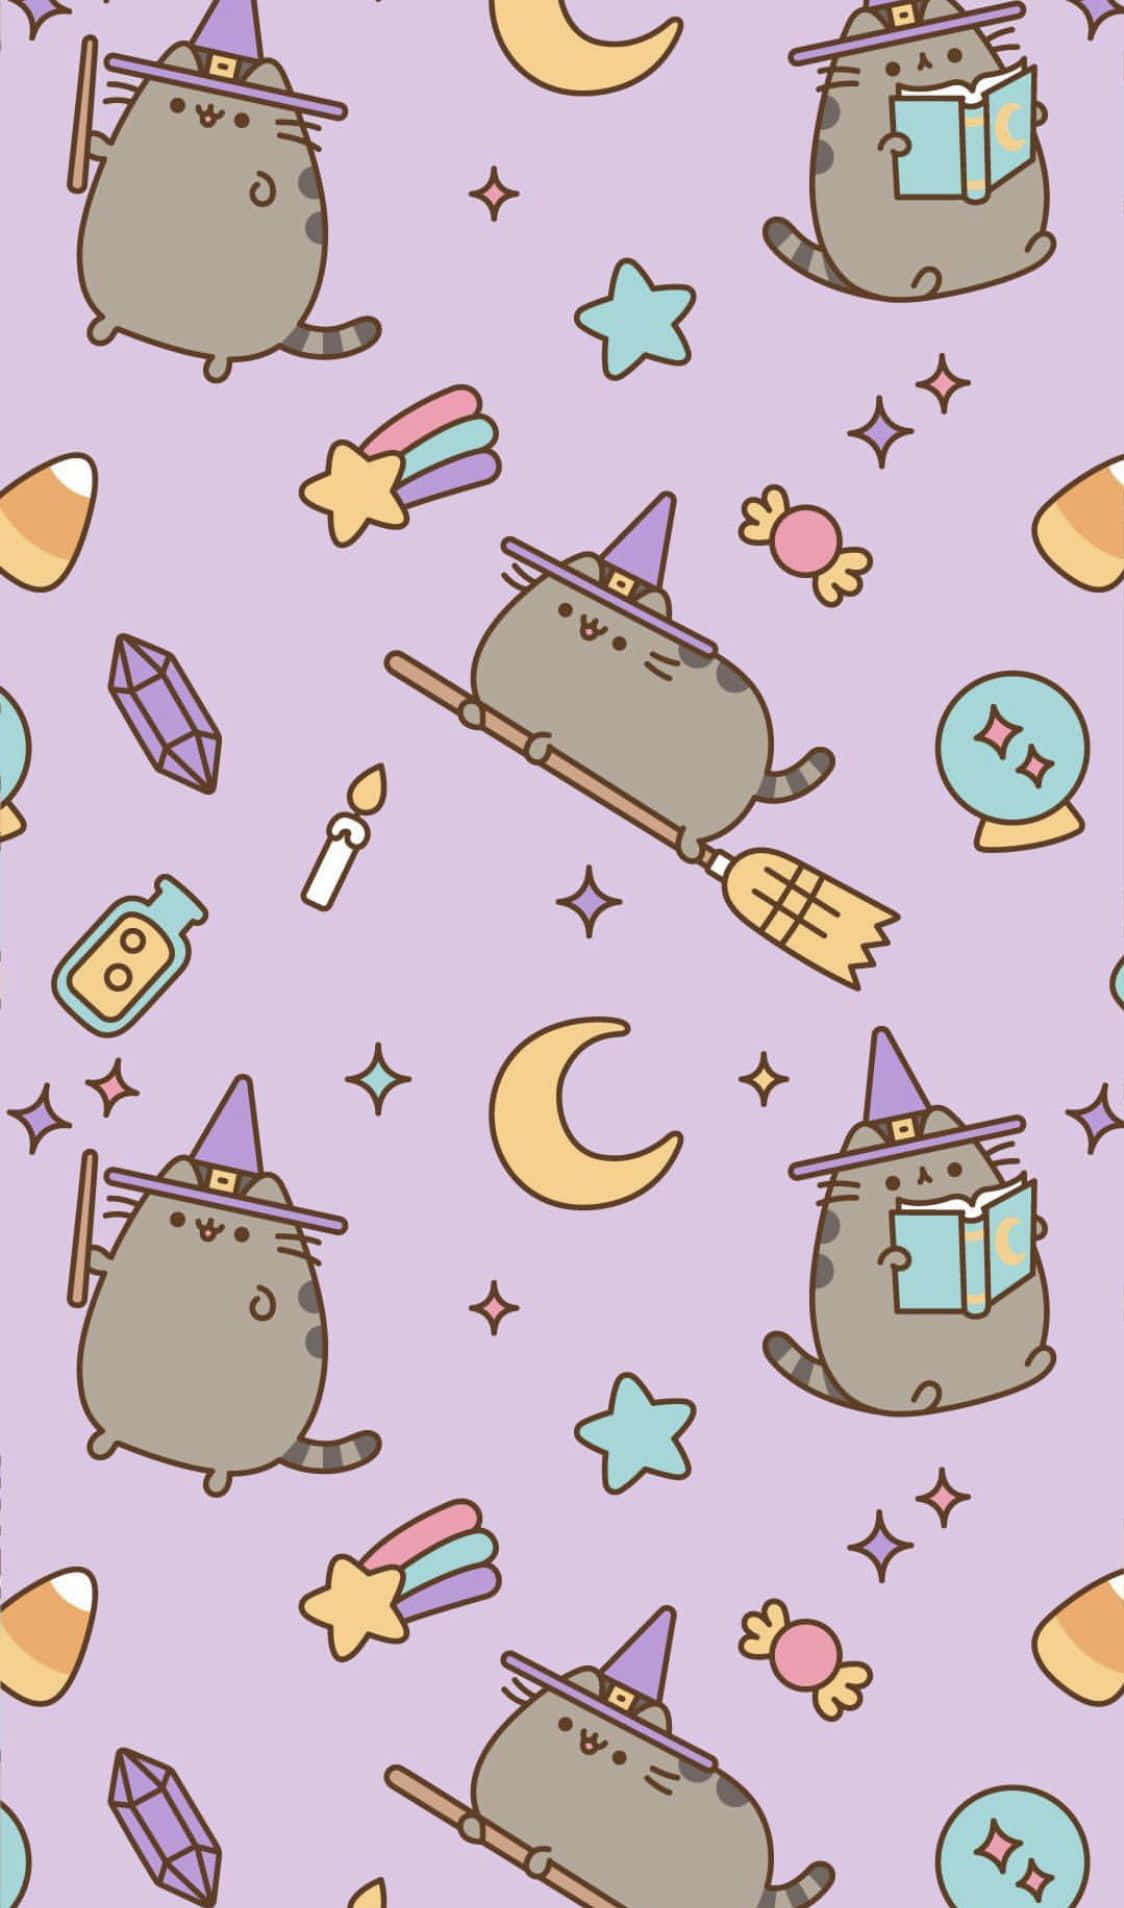 Pusheen Halloween wallpaper for your phone! (iPhone and Android) - Pusheen, witch